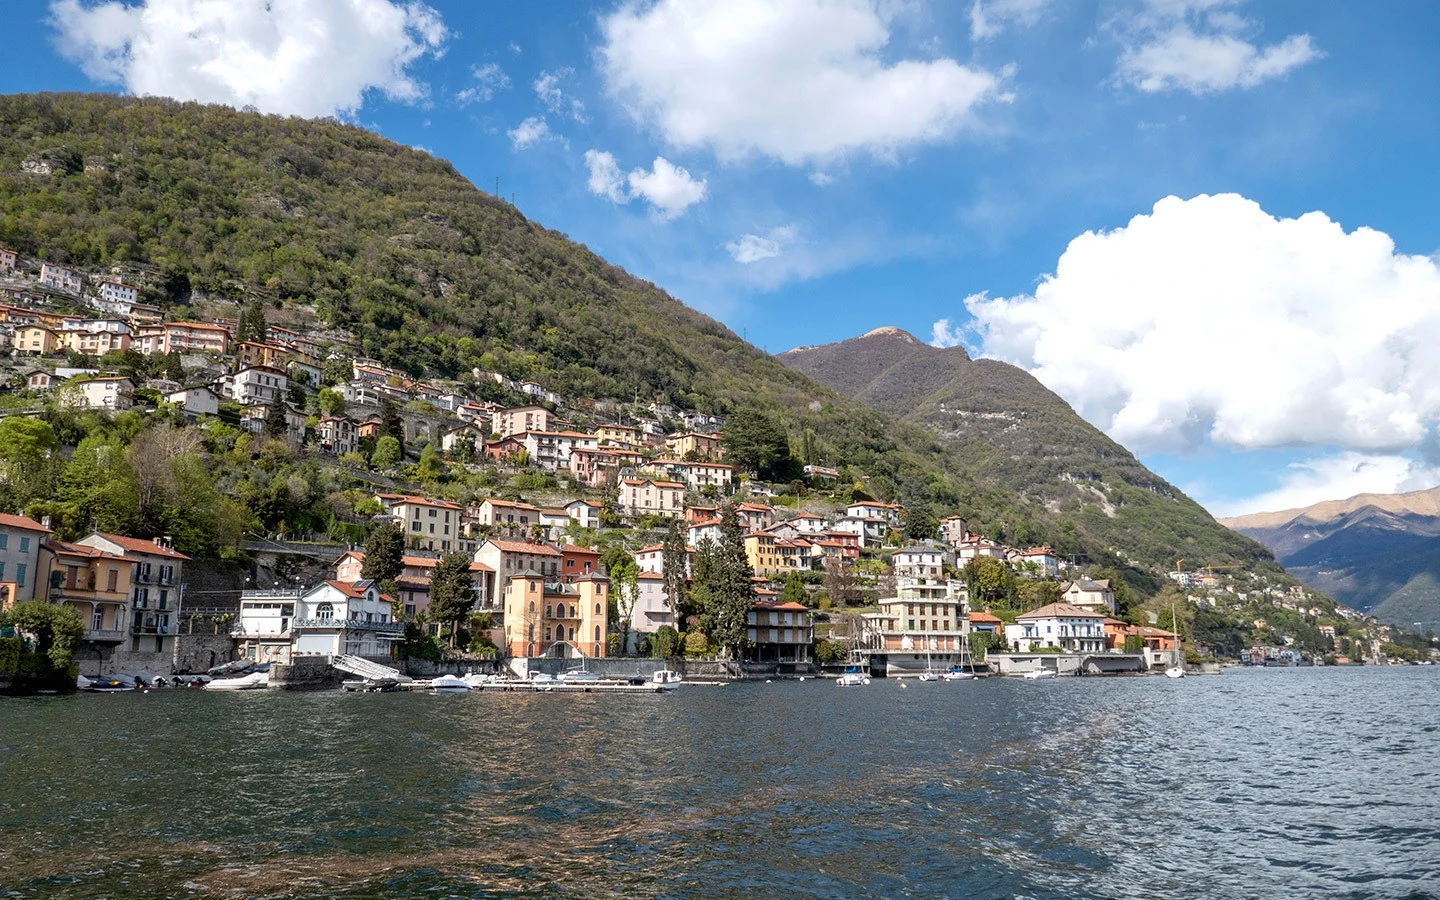 Views of waterside villages from a boat trip on Lake Como, Italy